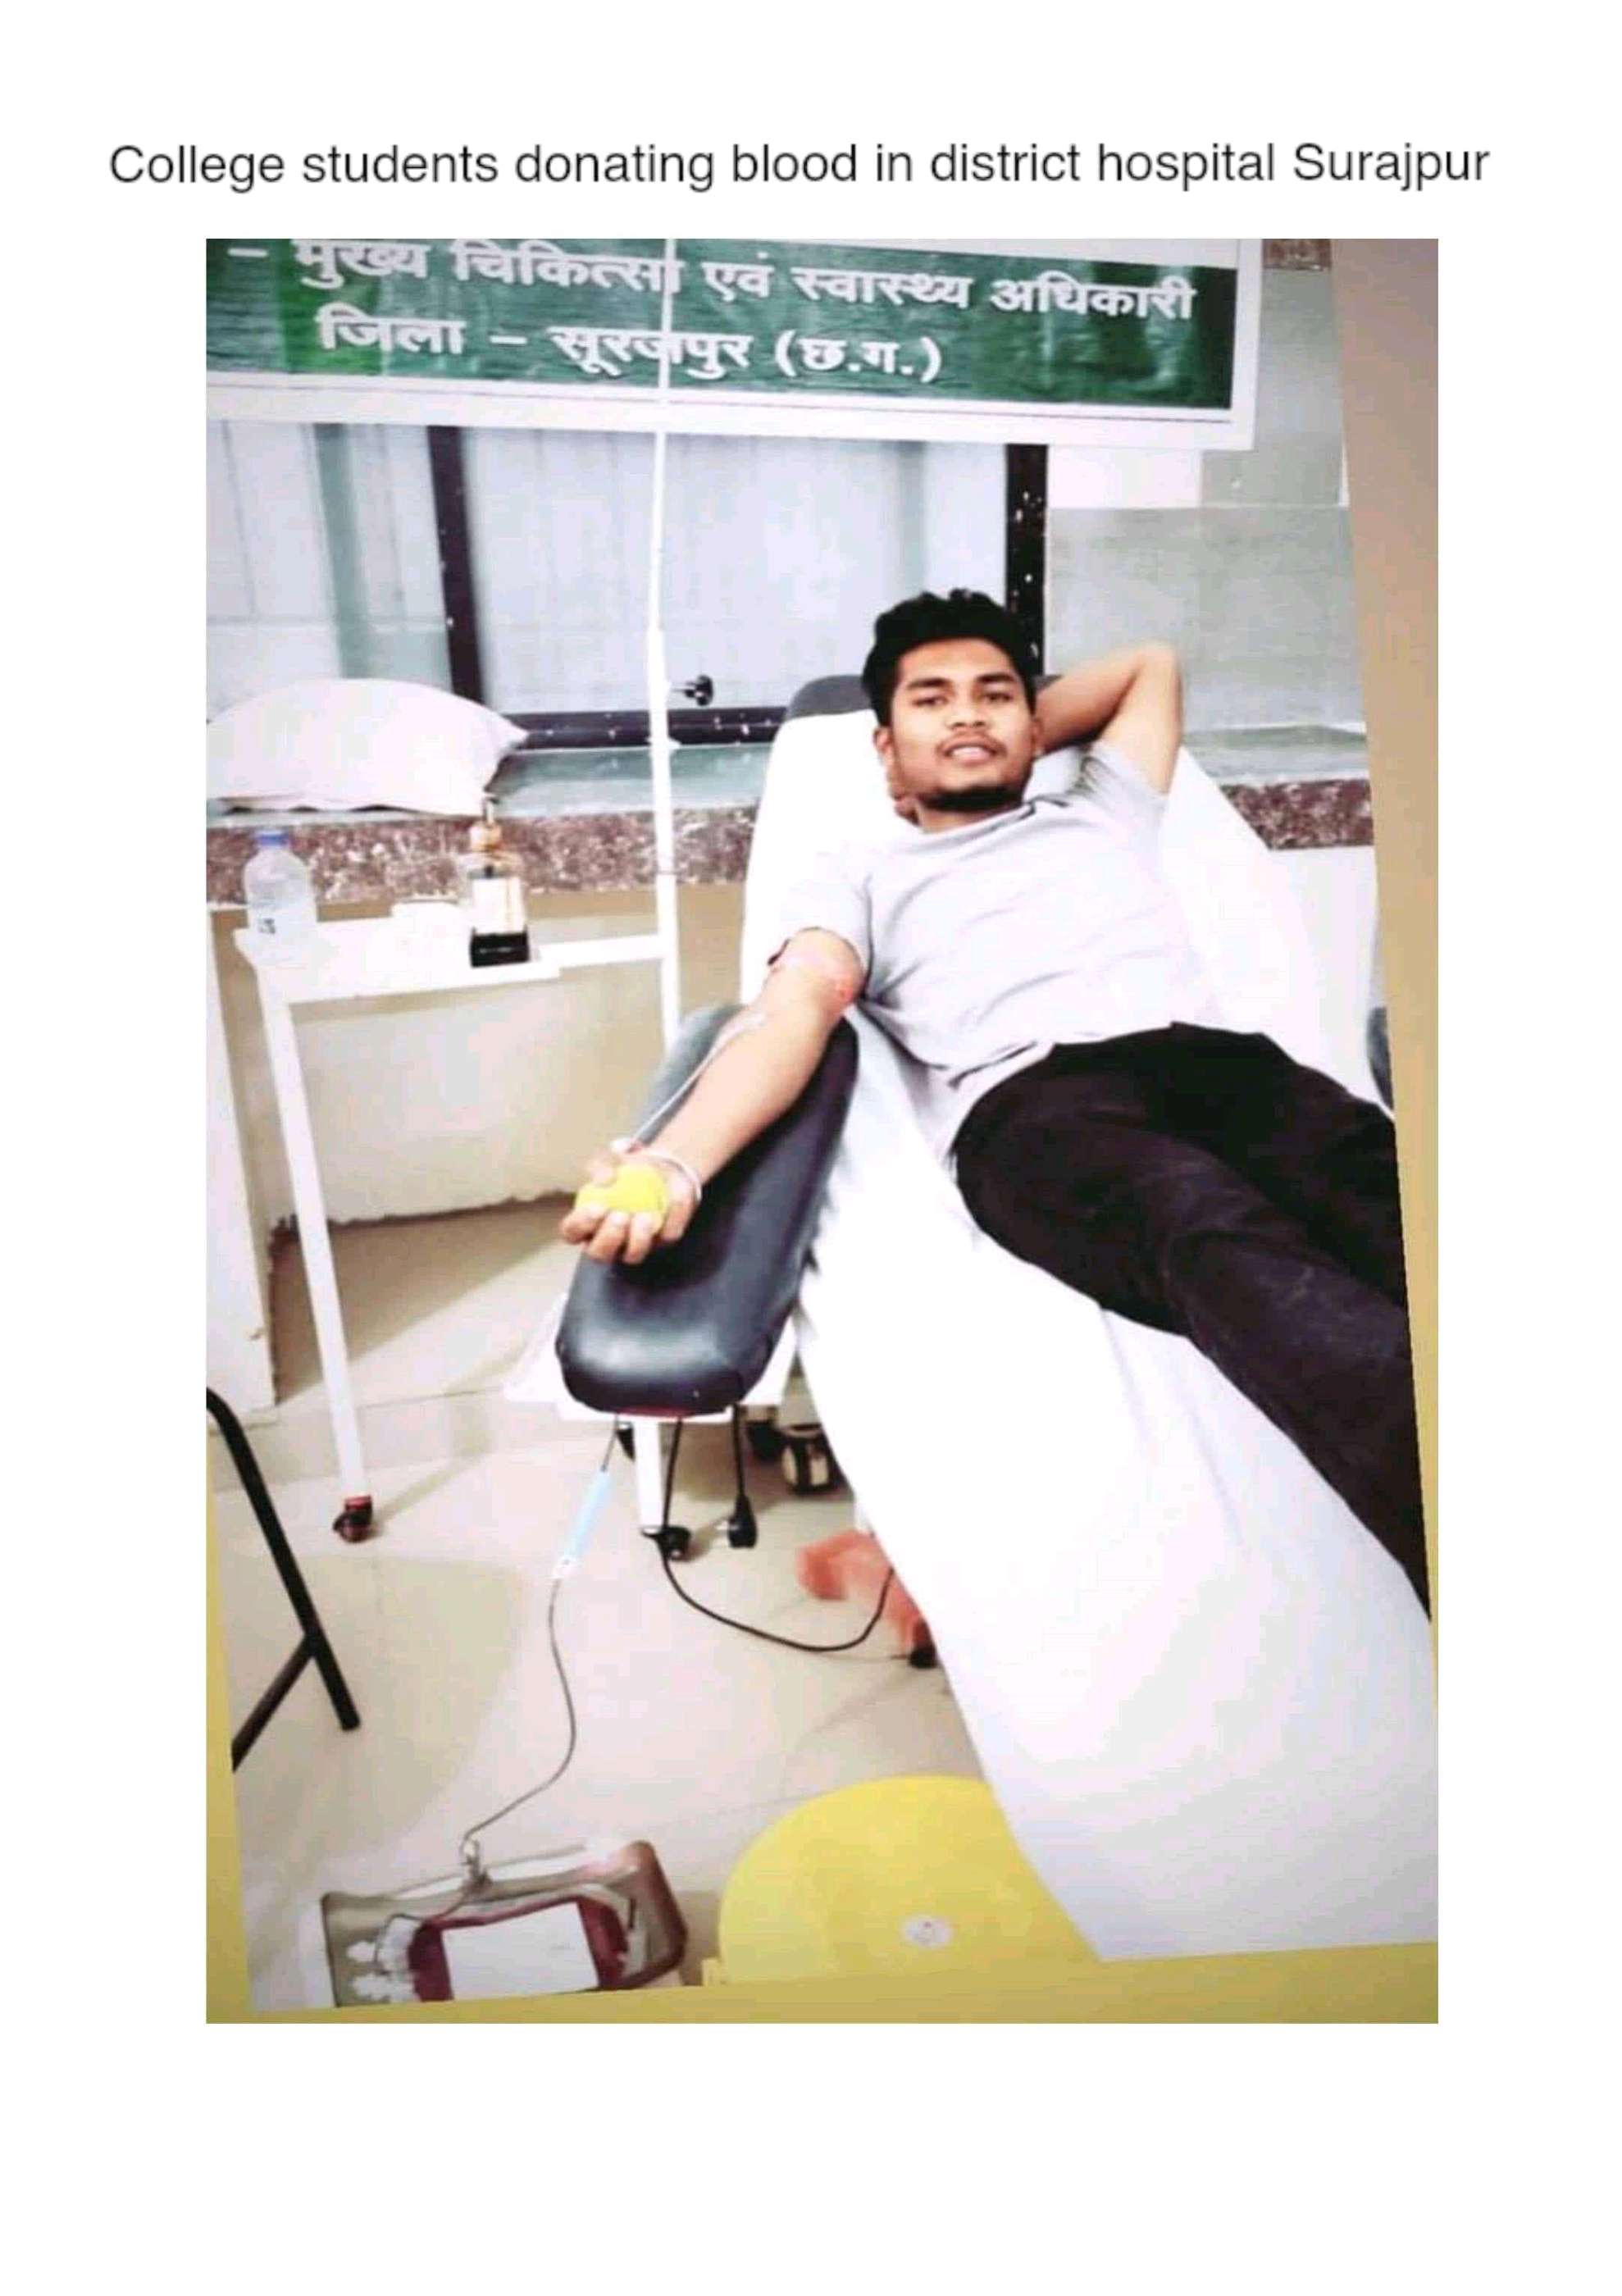 Blood donation practice by college students and staffs